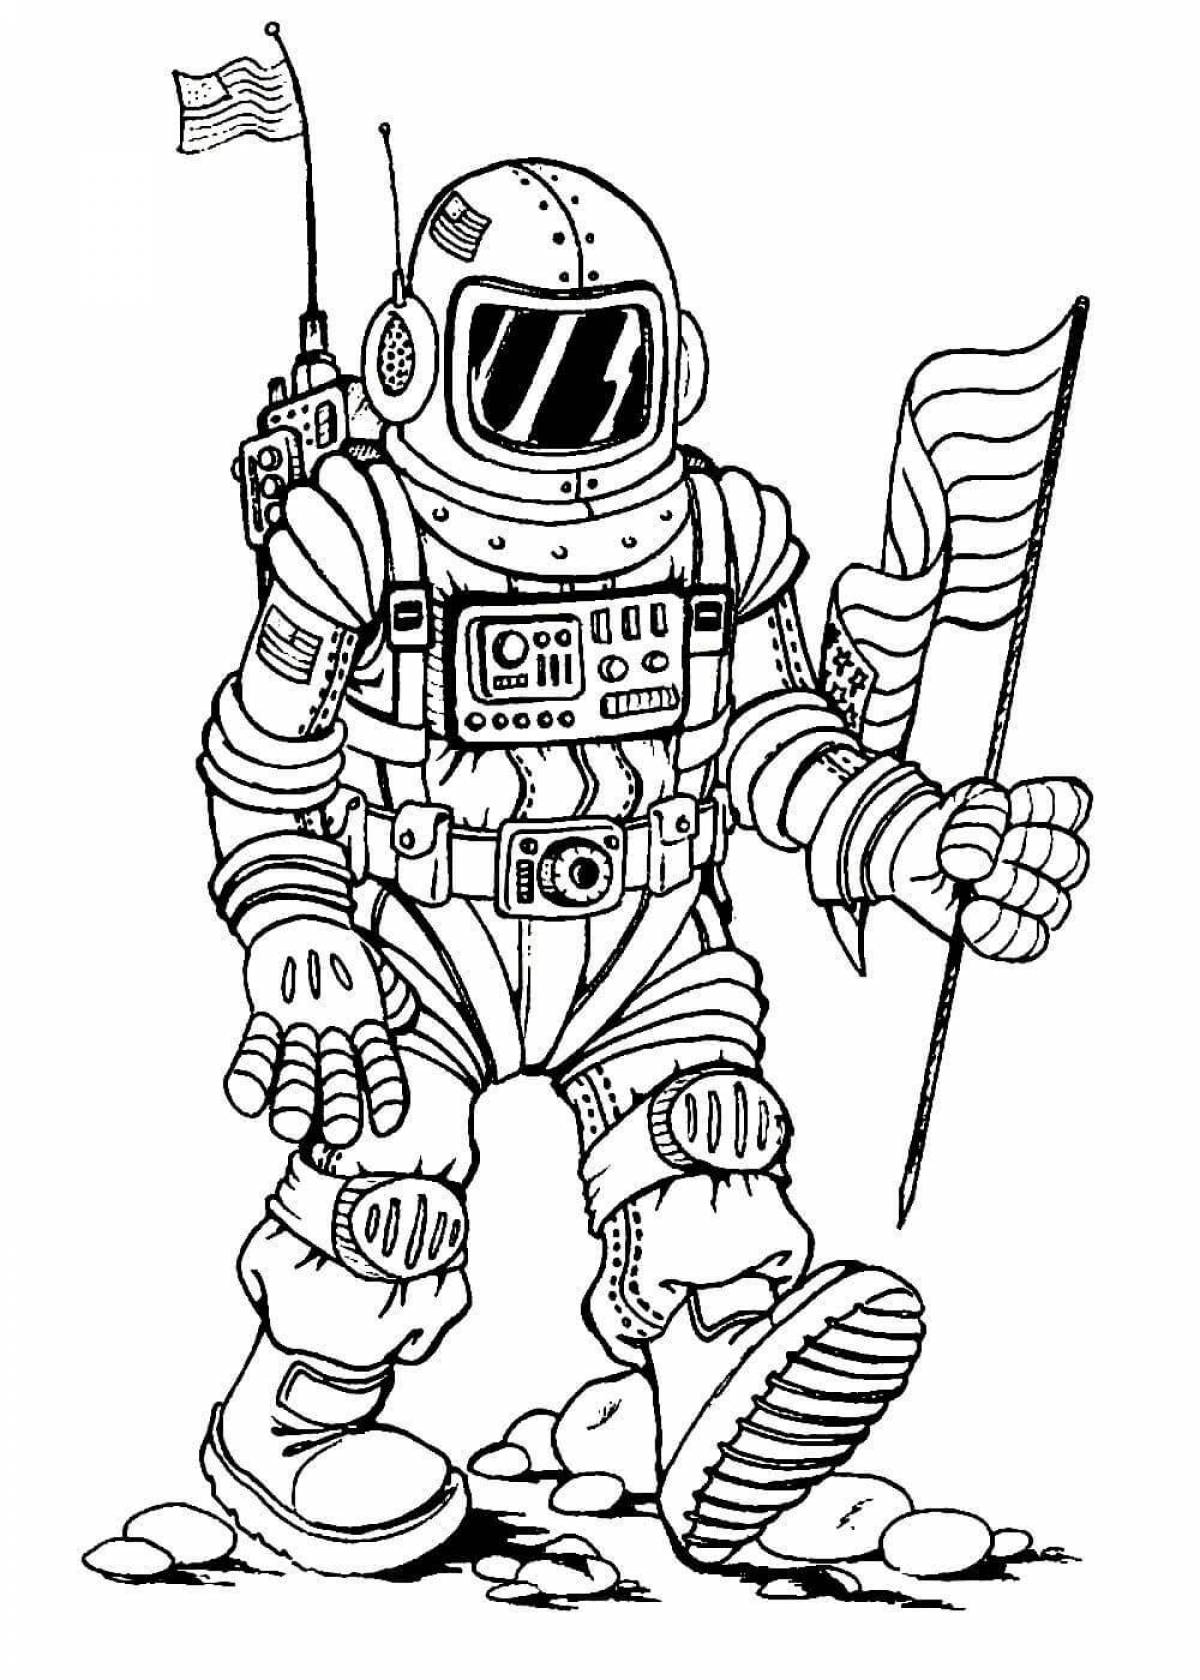 Animated astronaut coloring page